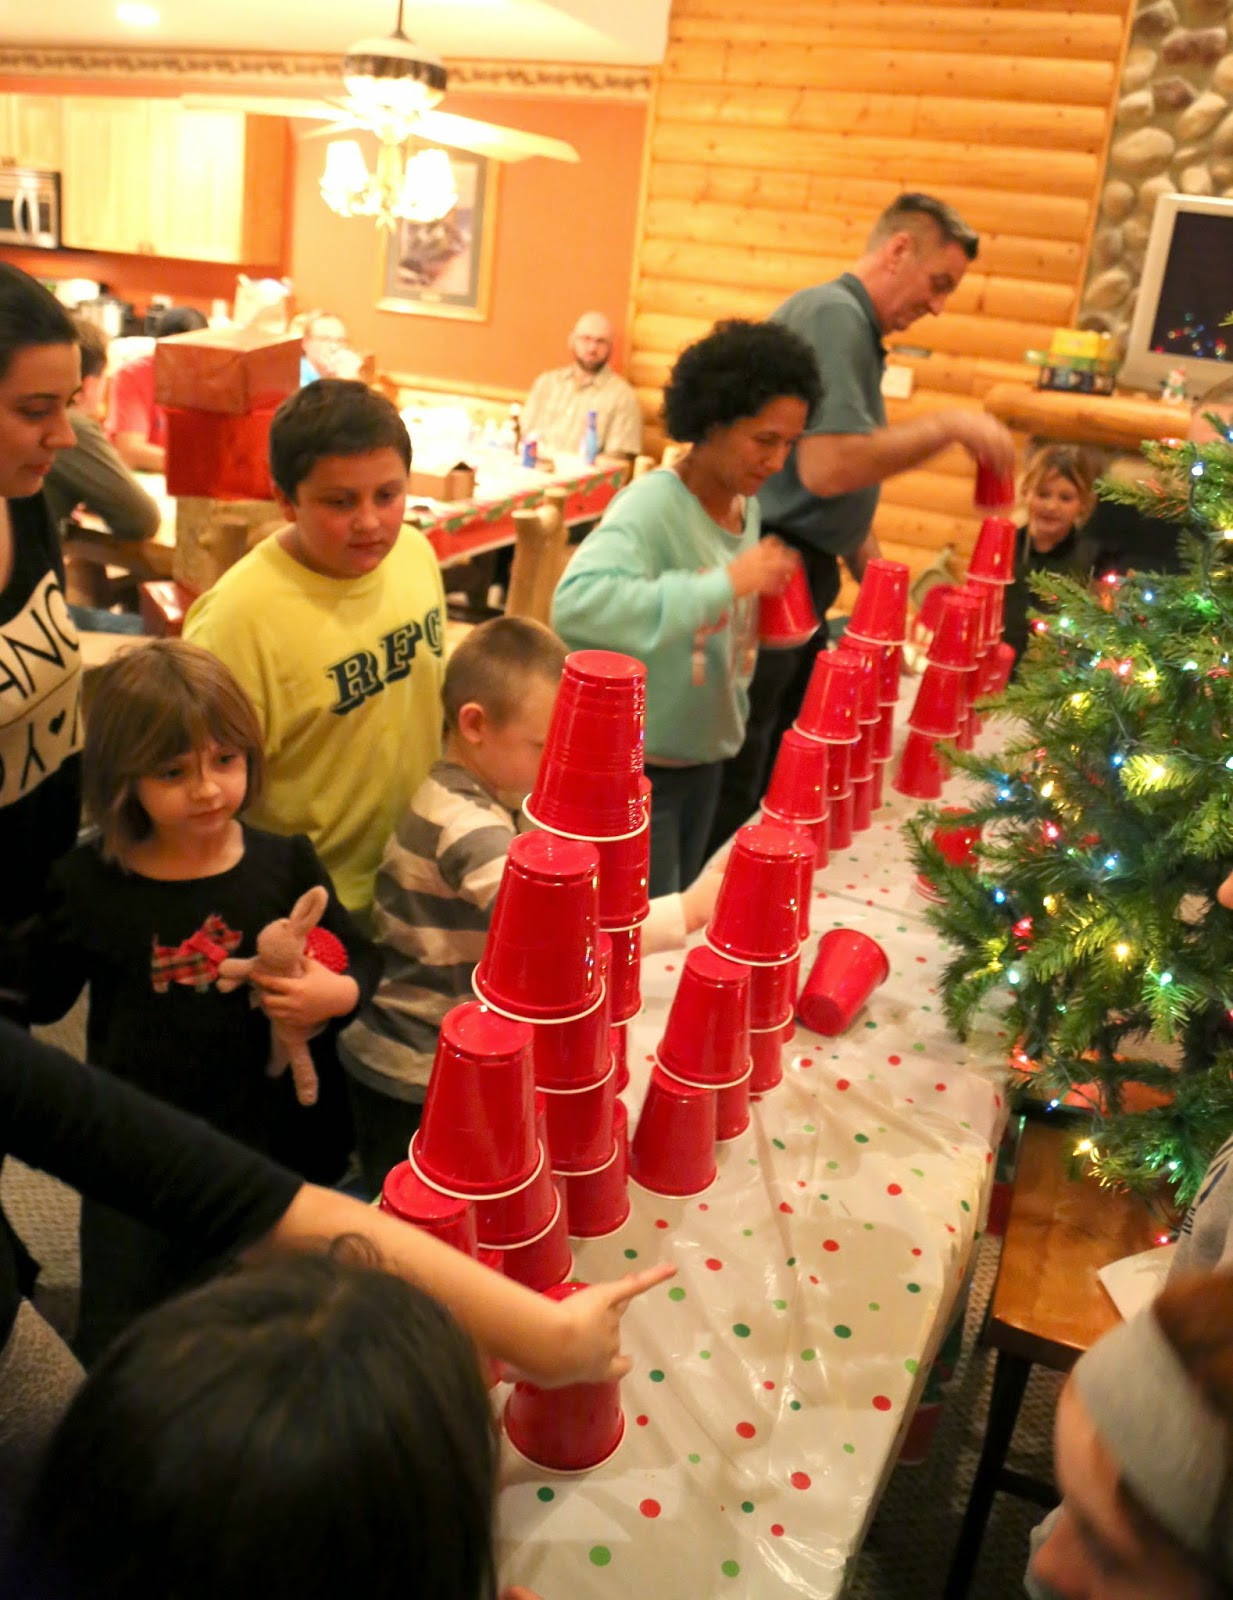 Ideas For Family Christmas Party
 Notable Nest Fun Family Christmas Party Games to Try